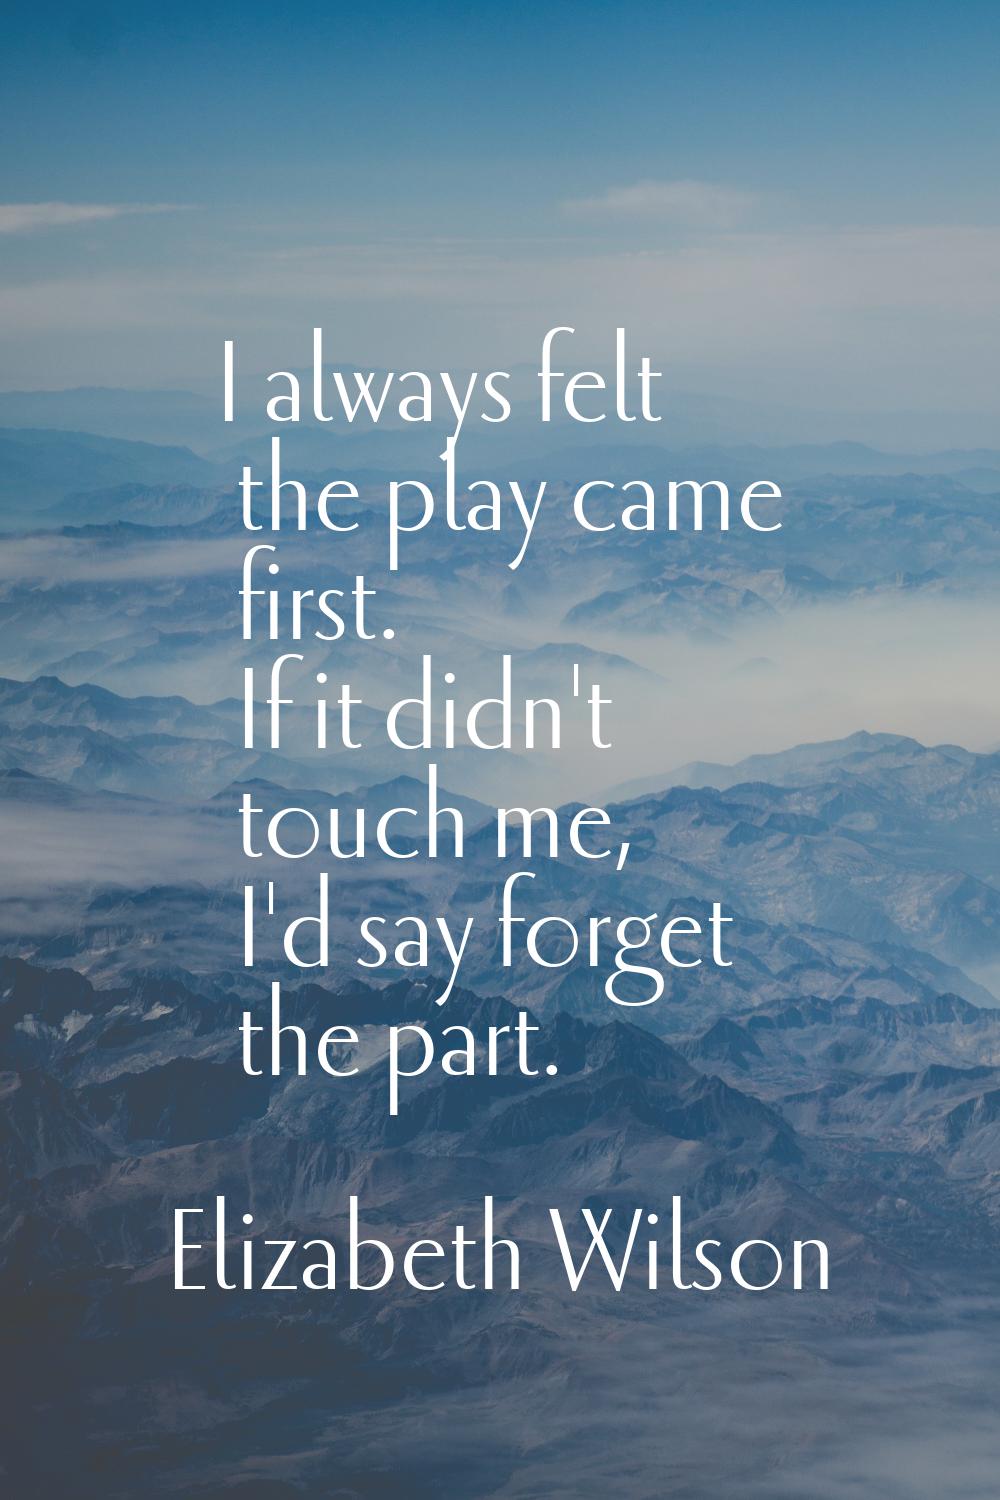 I always felt the play came first. If it didn't touch me, I'd say forget the part.